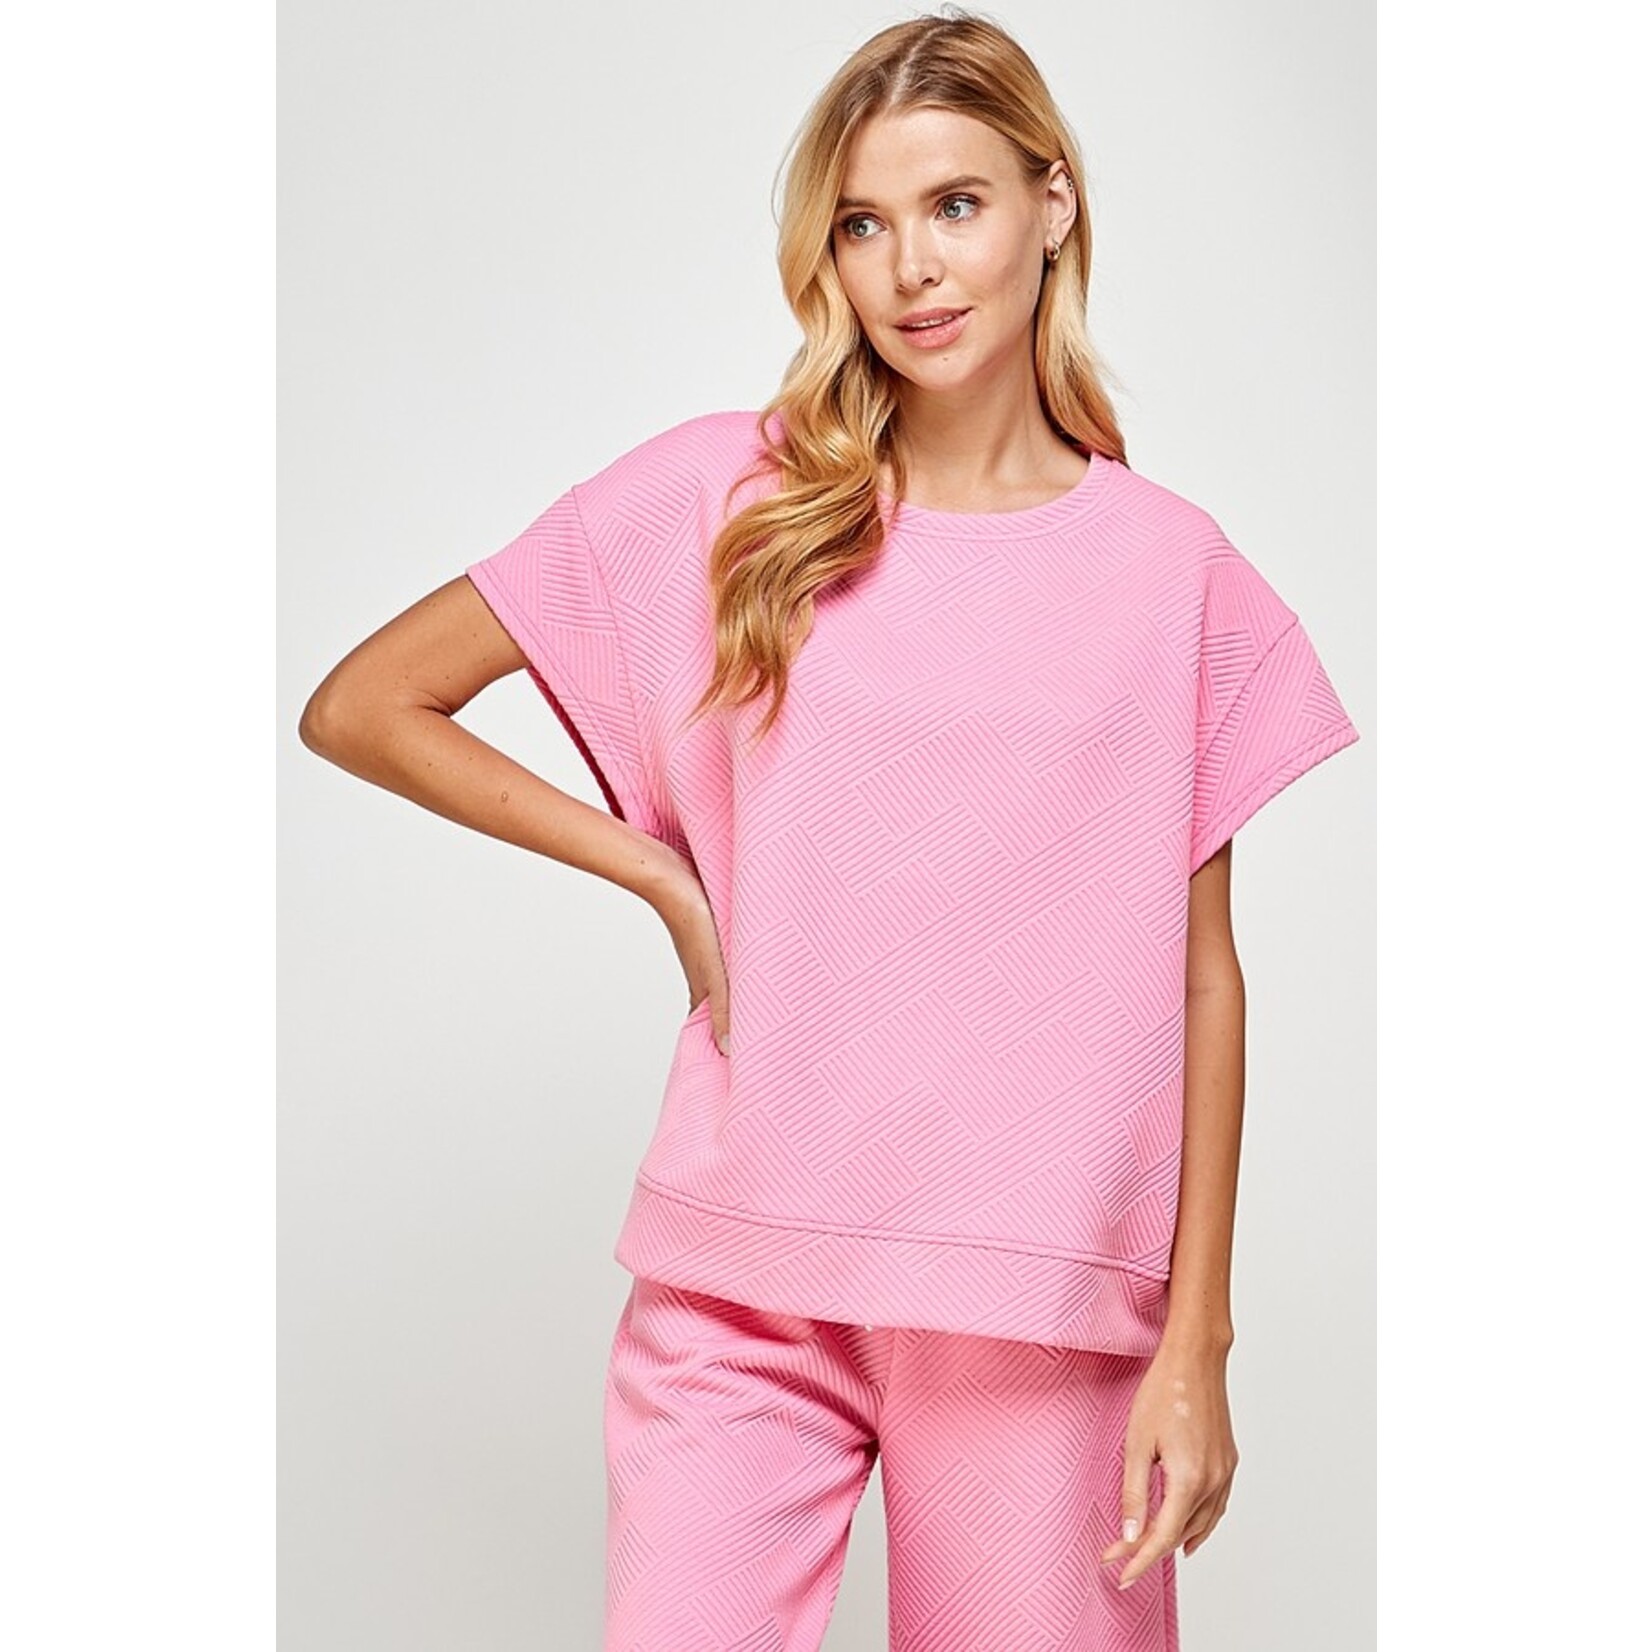 See And Seen Amy Bubble Gum Pink Textured Top